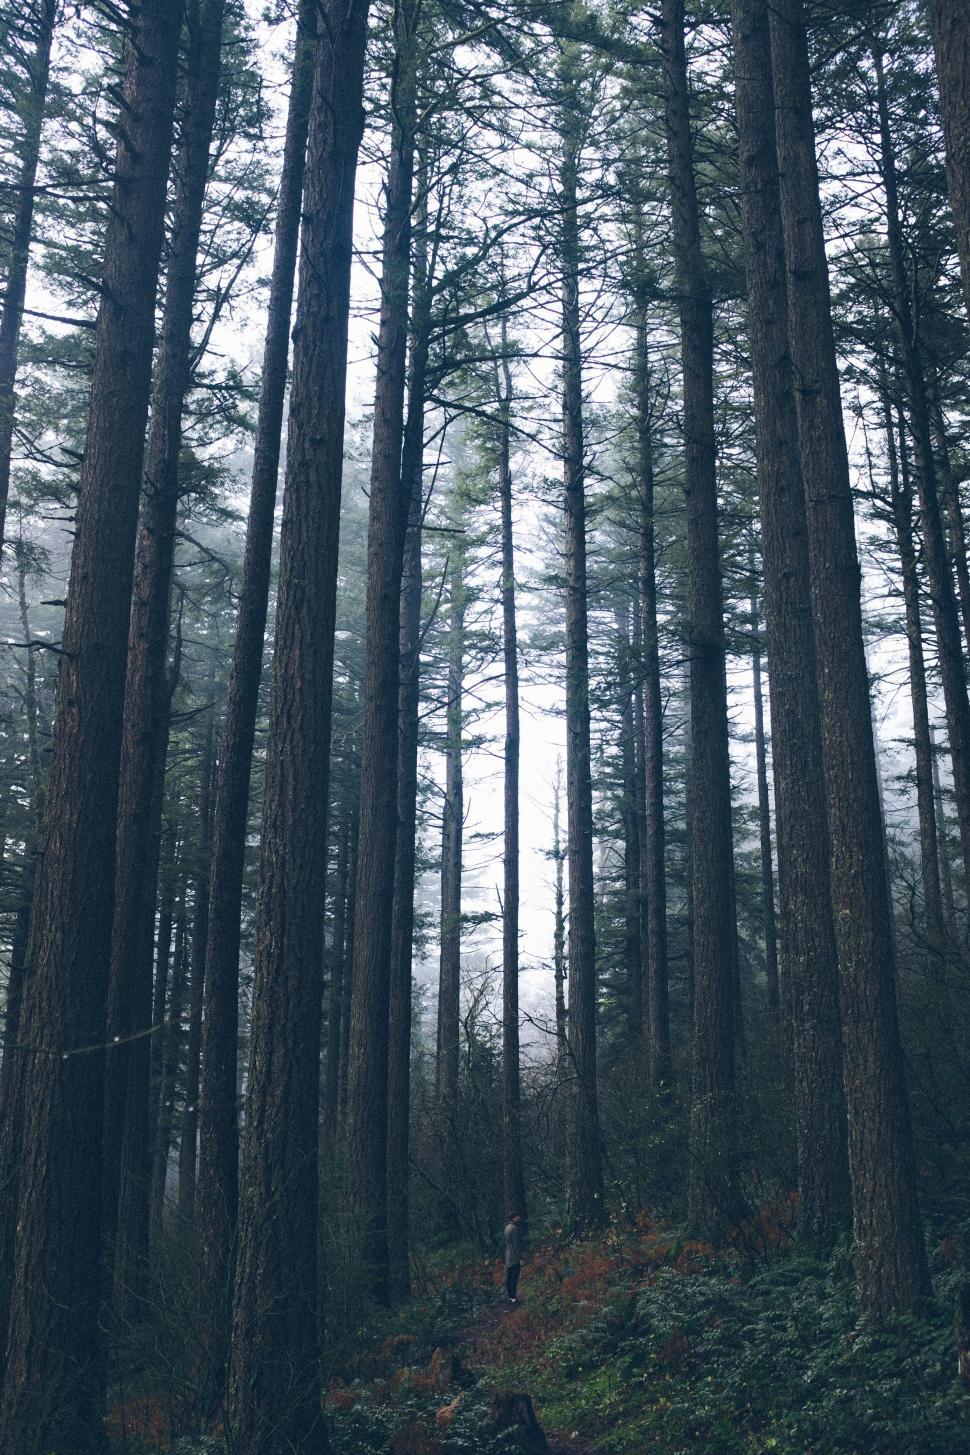 Free Image of Misty forest with tall dense trees 